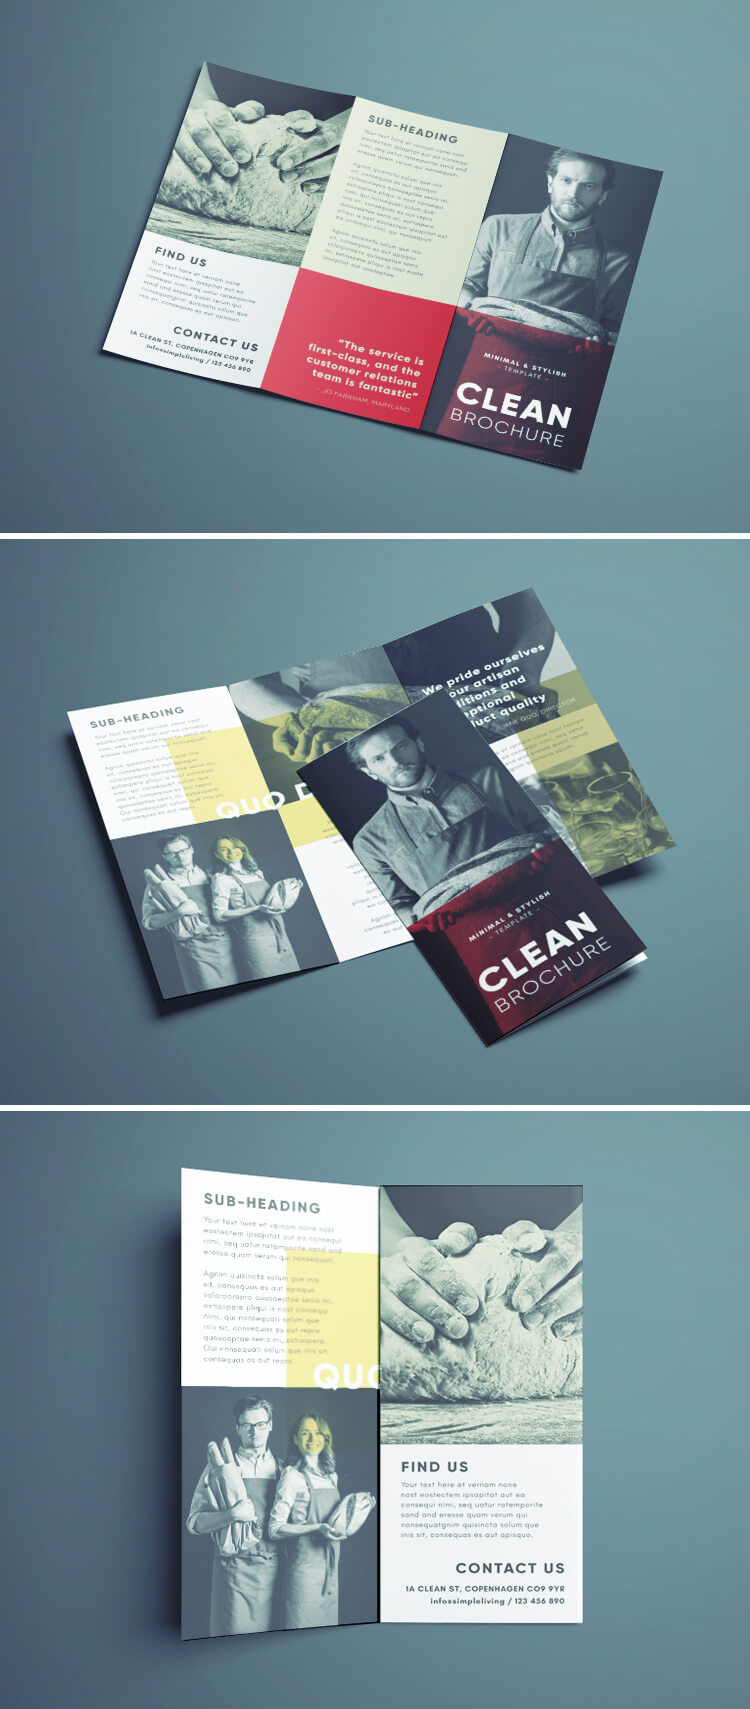 Stylish Clean Brochure Template - Free Download - Clean Layout with Hipster Photography and Simple Typography